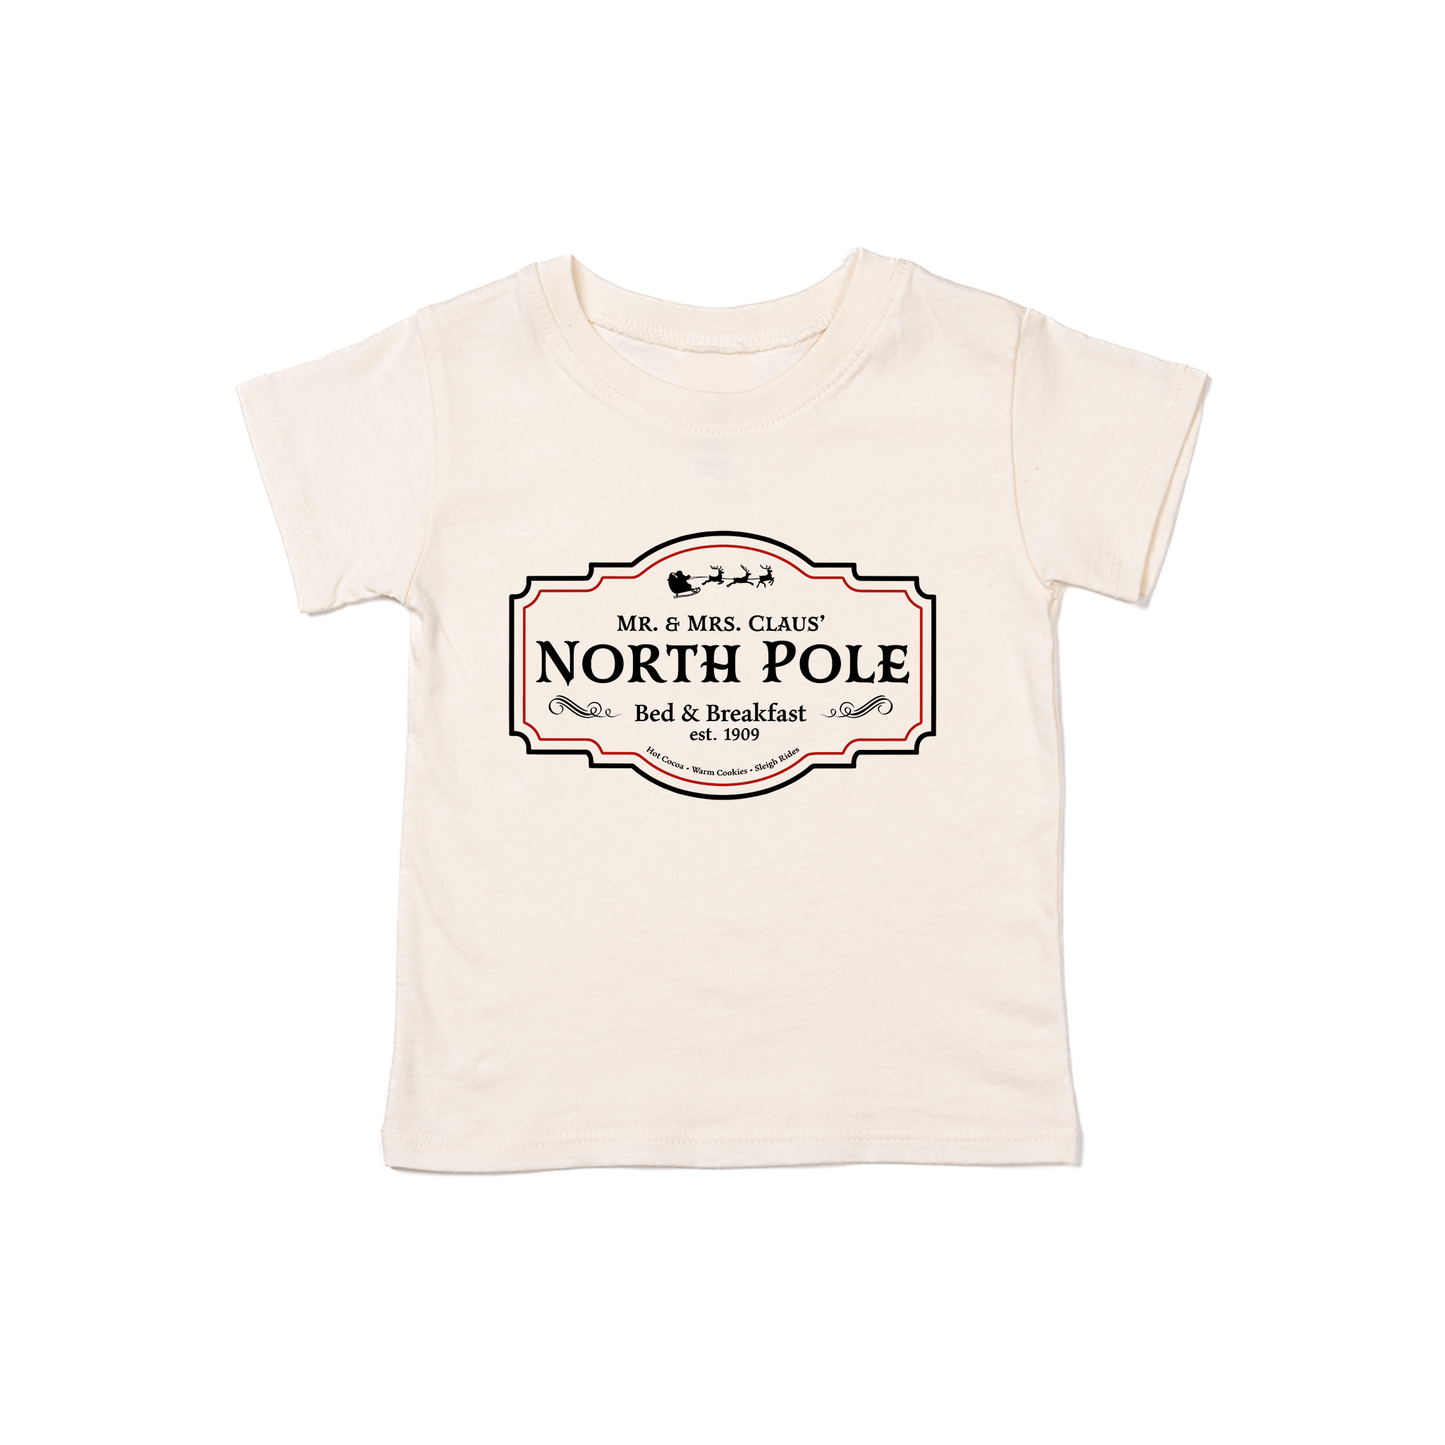 North Pole Bed & Breakfast - Kids Tee (Natural)